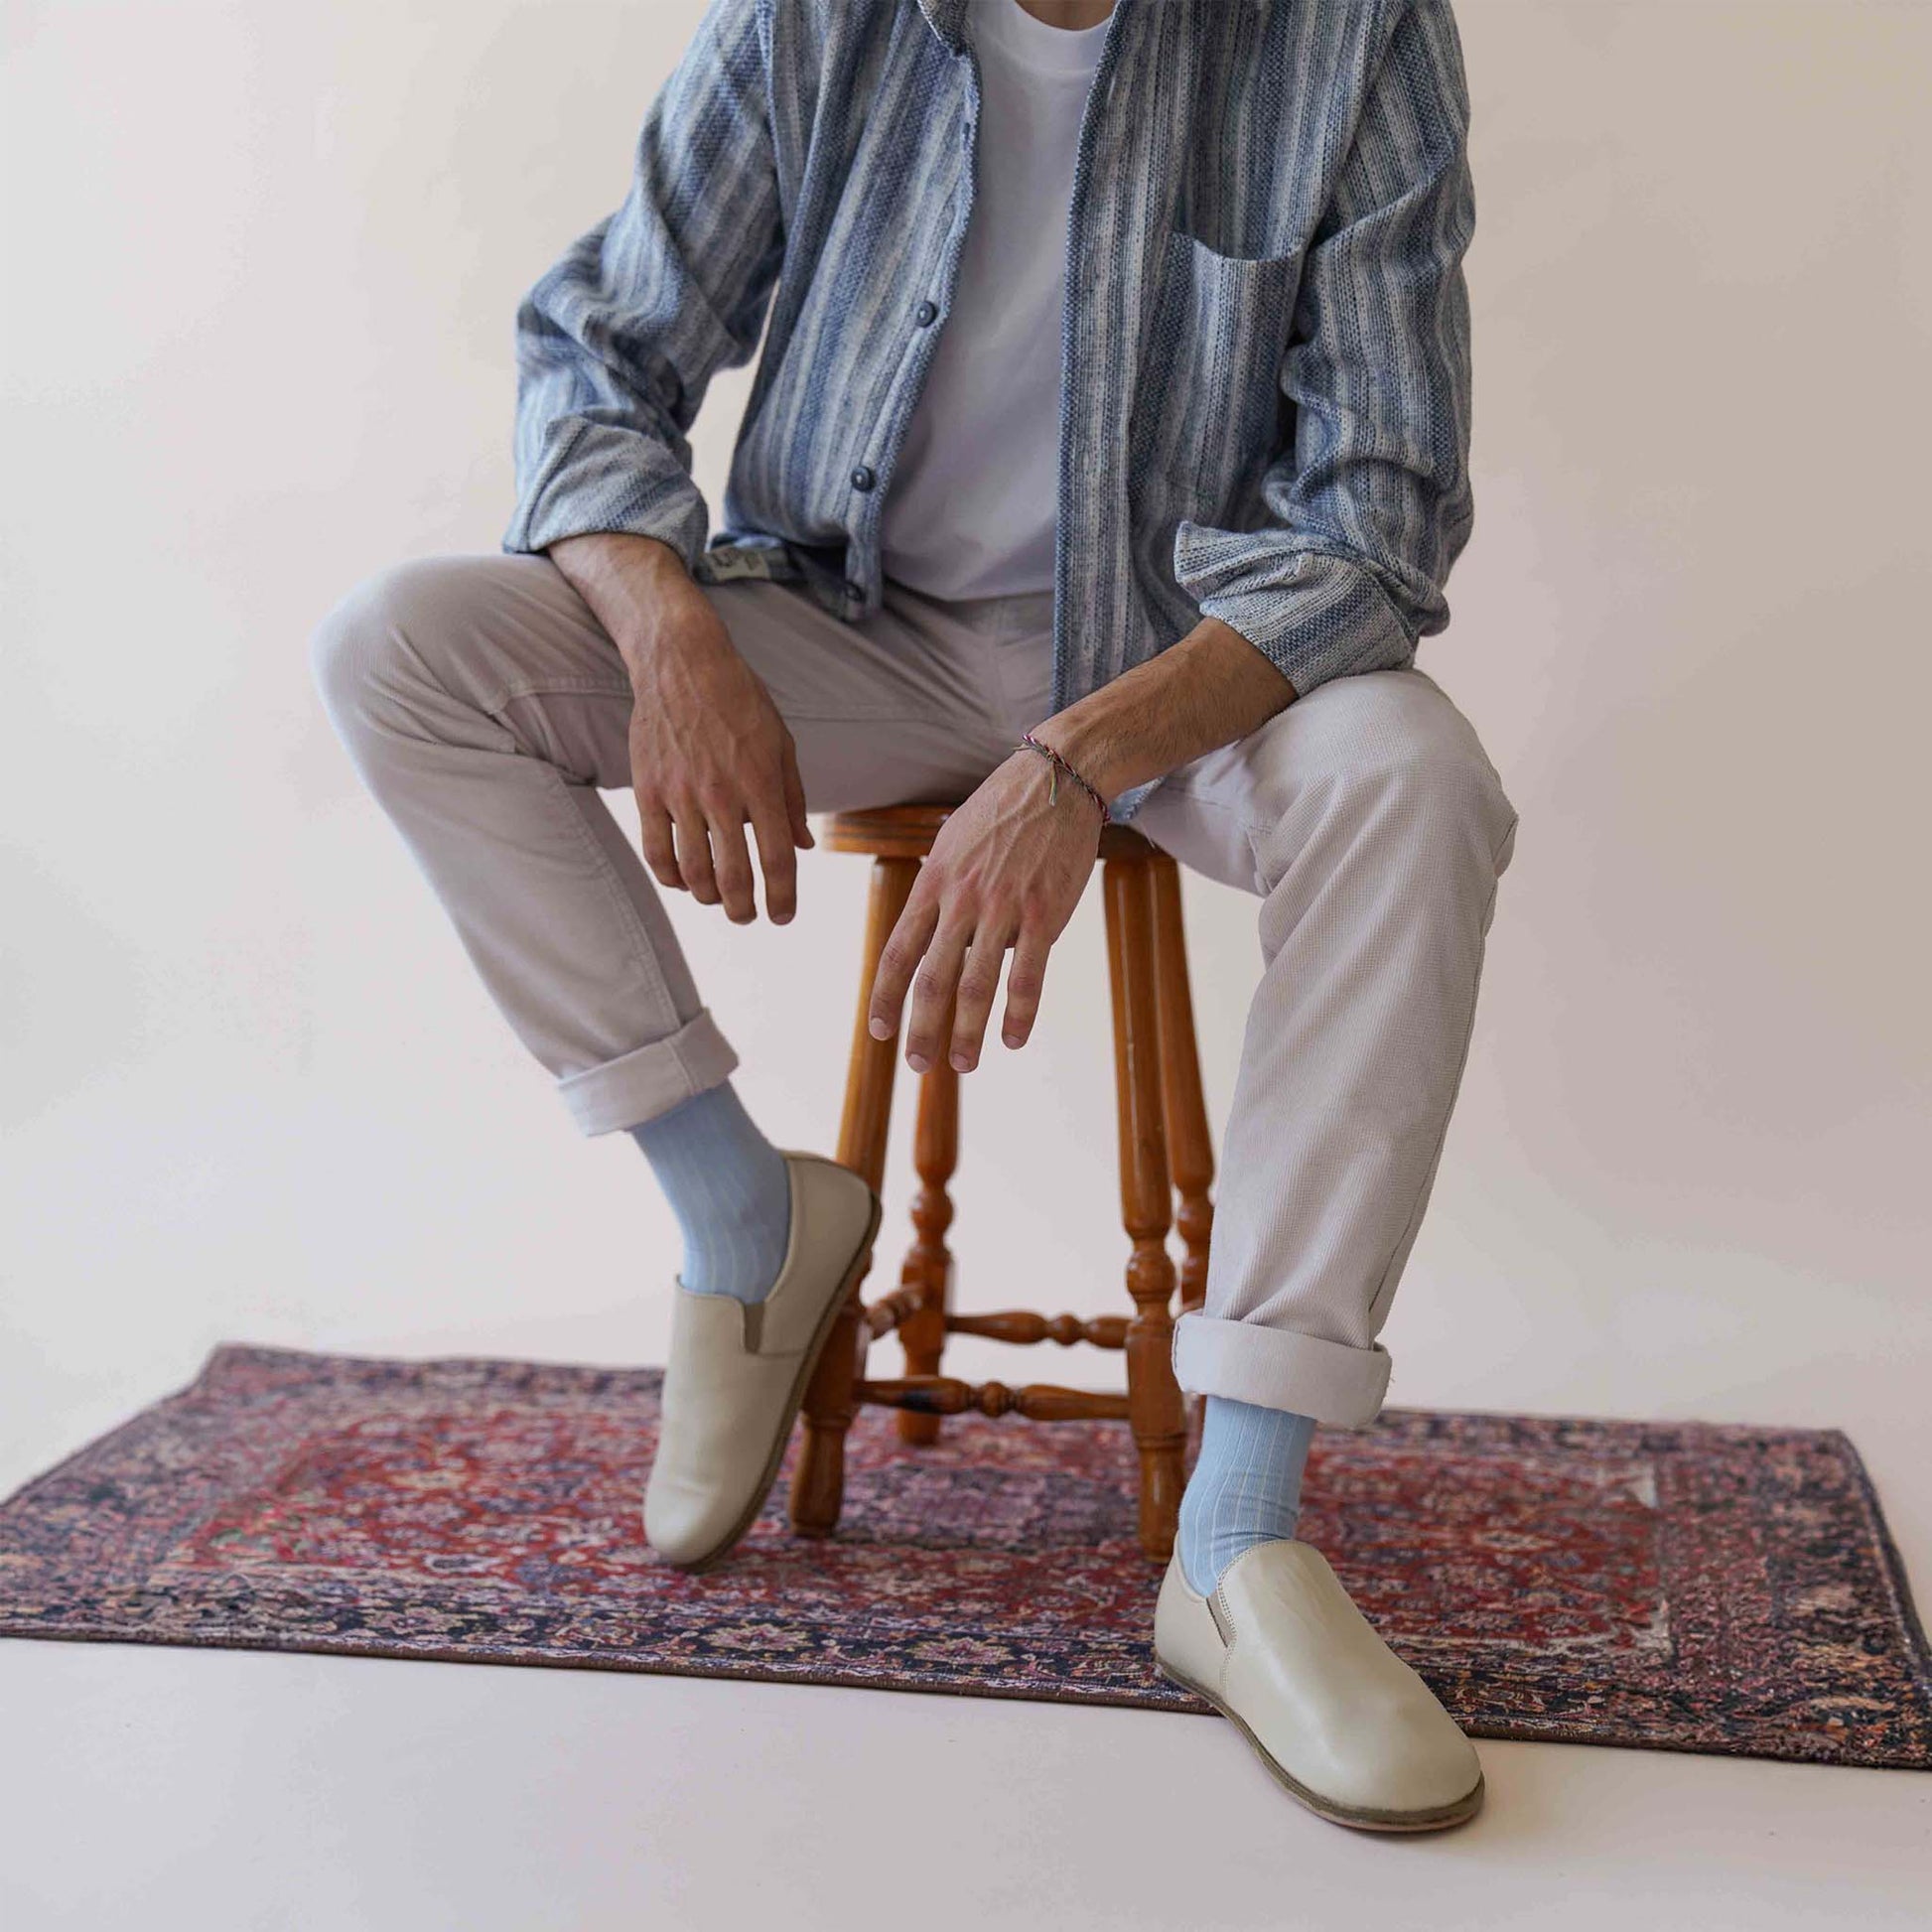 Model wearing Ionia Leather Barefoot Men Loafers in beige, paired with light-colored pants and a striped shirt, sitting on a stool.